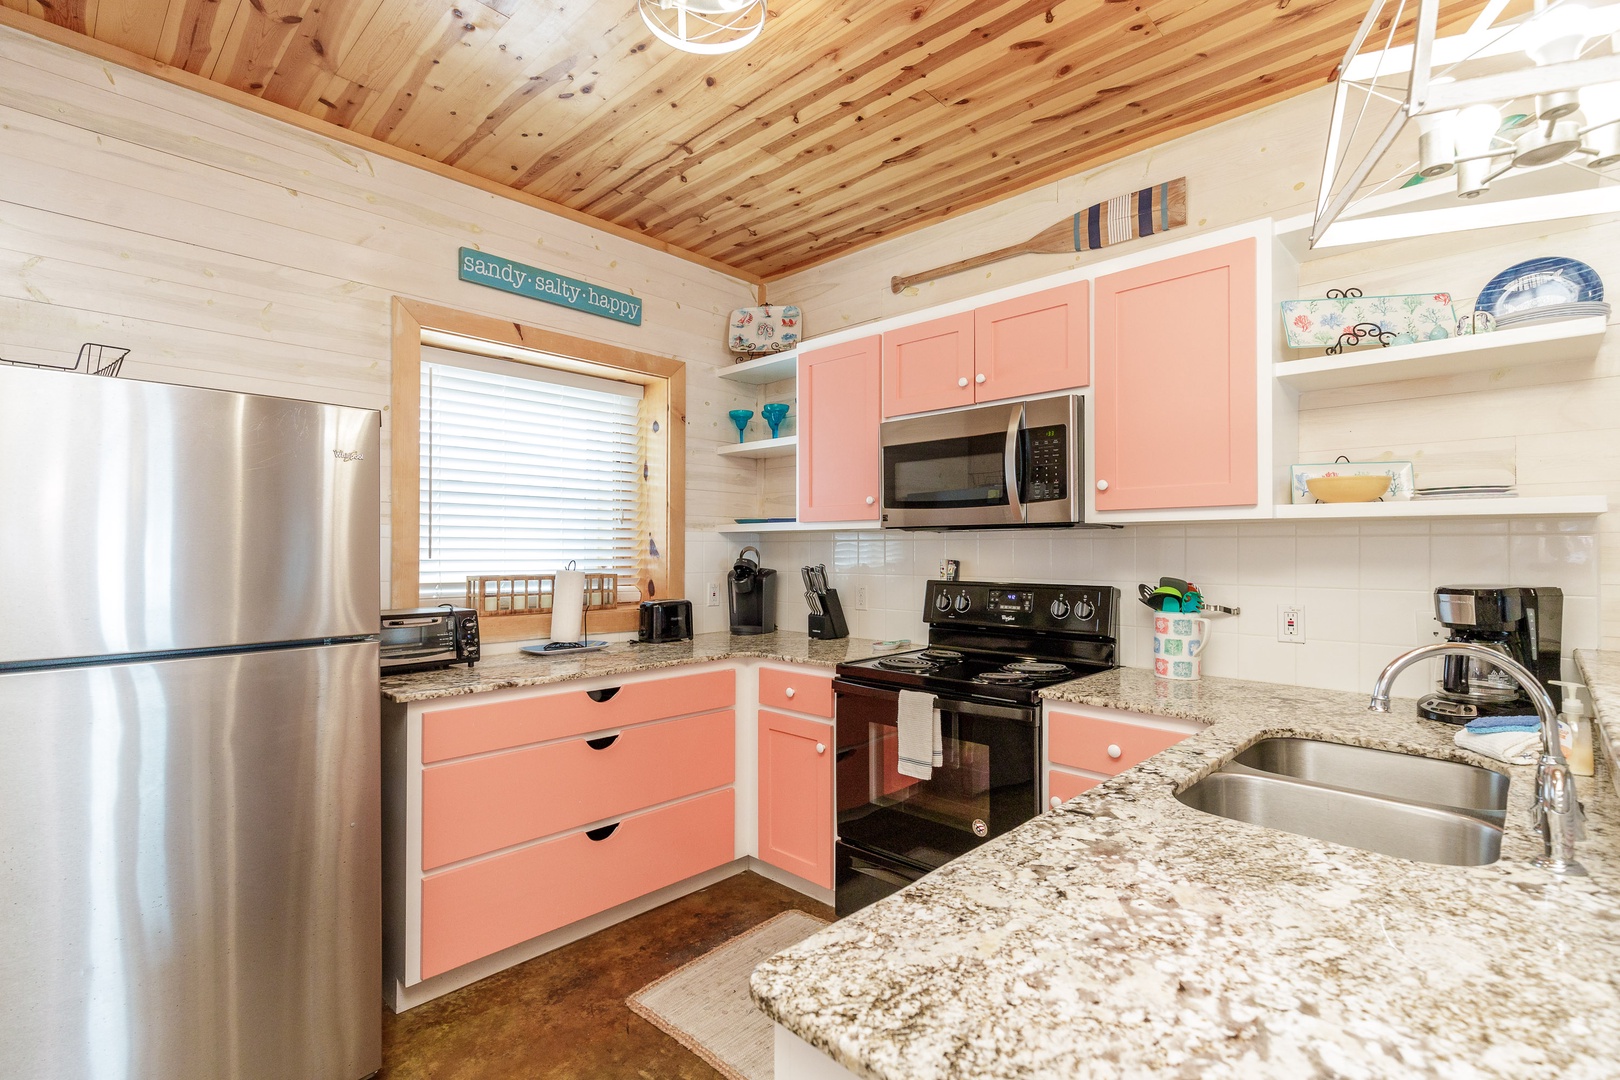 The colorful coastal kitchen offers ample space & all the comforts of home